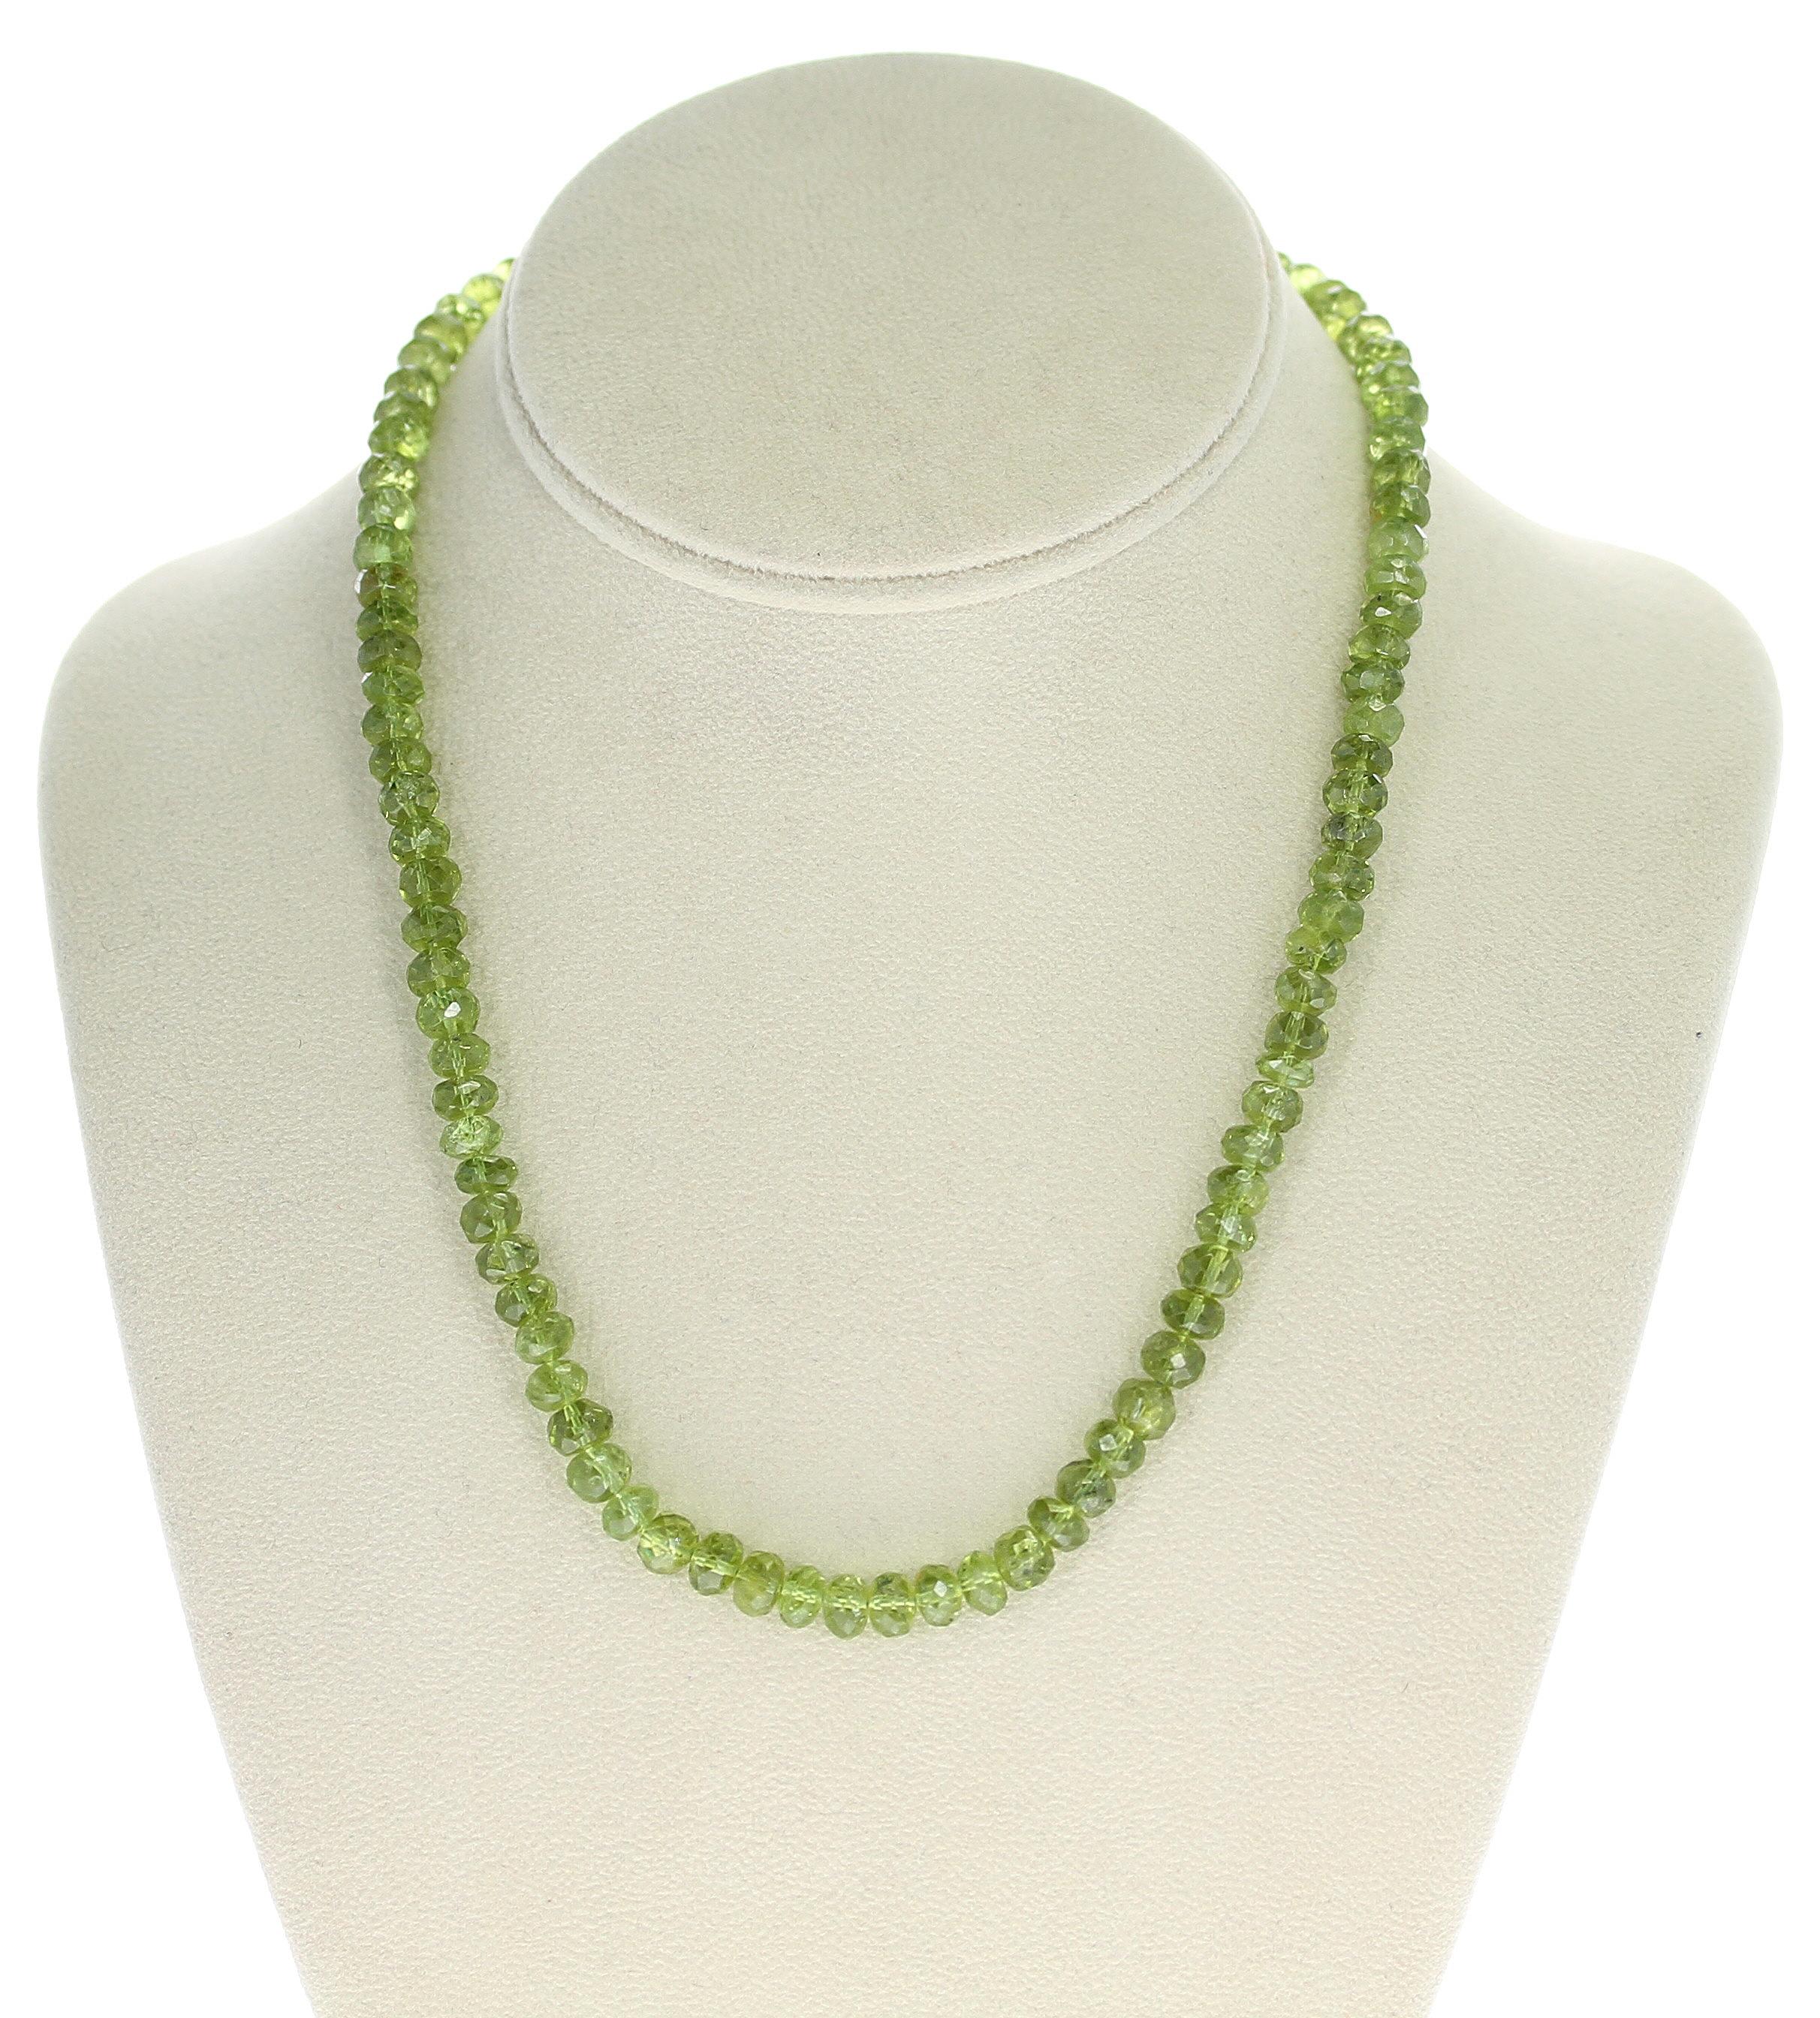 A Genuine Faceted 7MM Peridot Beads Necklace. The clasp is Sterling Silver. The necklace weighs 188 carats, the length is 18